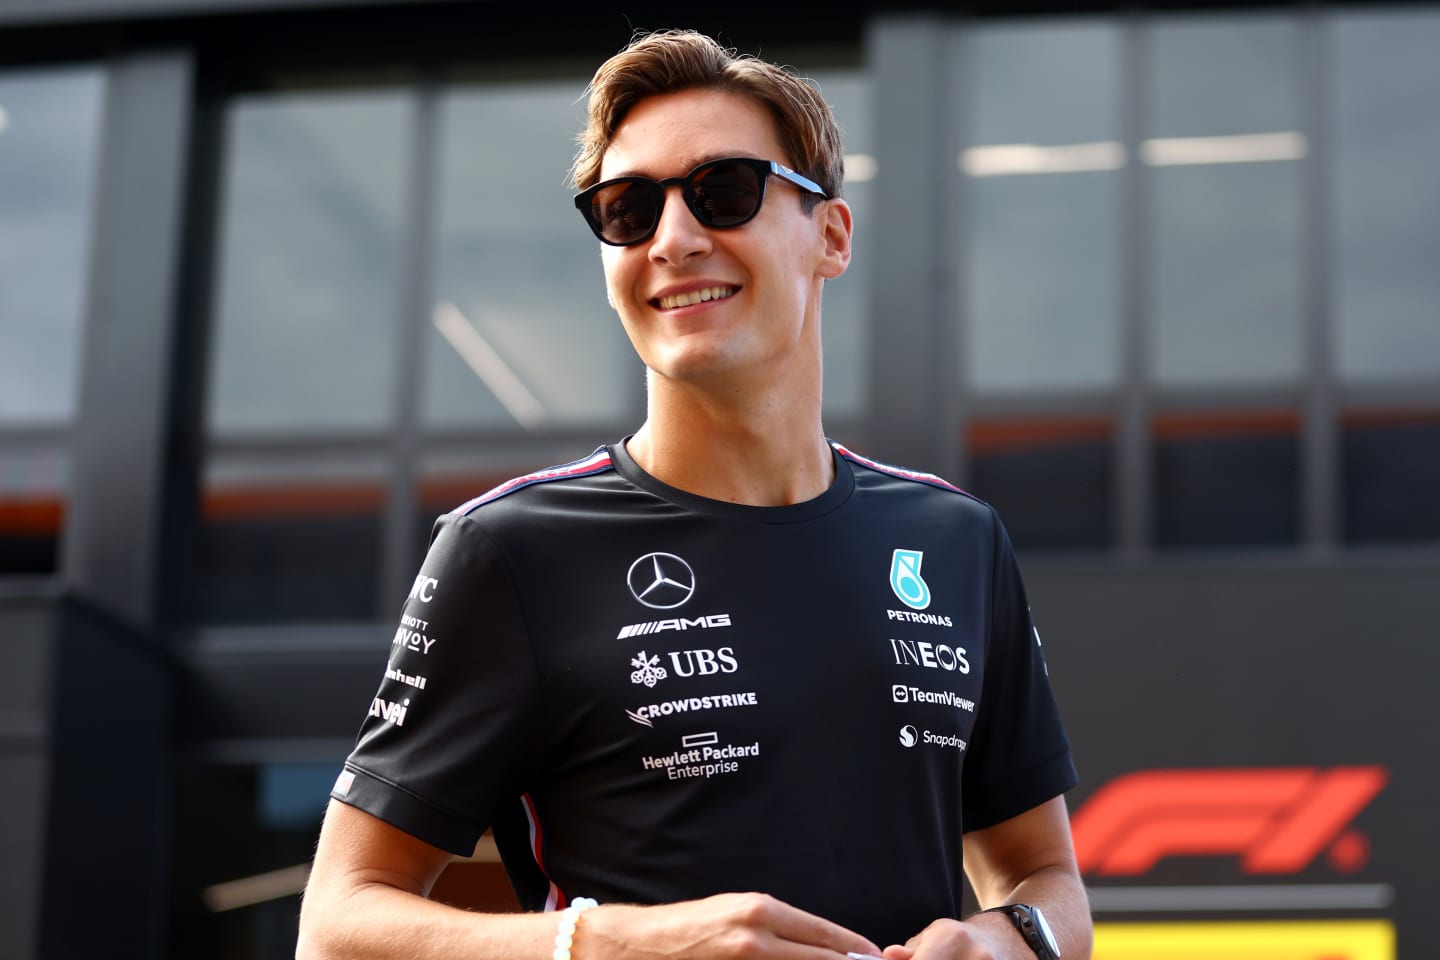 MONZA, ITALY - SEPTEMBER 01: George Russell of Great Britain and Mercedes walks in the Paddock prior to practice ahead of the F1 Grand Prix of Italy at Autodromo Nazionale Monza on September 01, 2023 in Monza, Italy. (Photo by Bryn Lennon - Formula 1/Formula 1 via Getty Images)